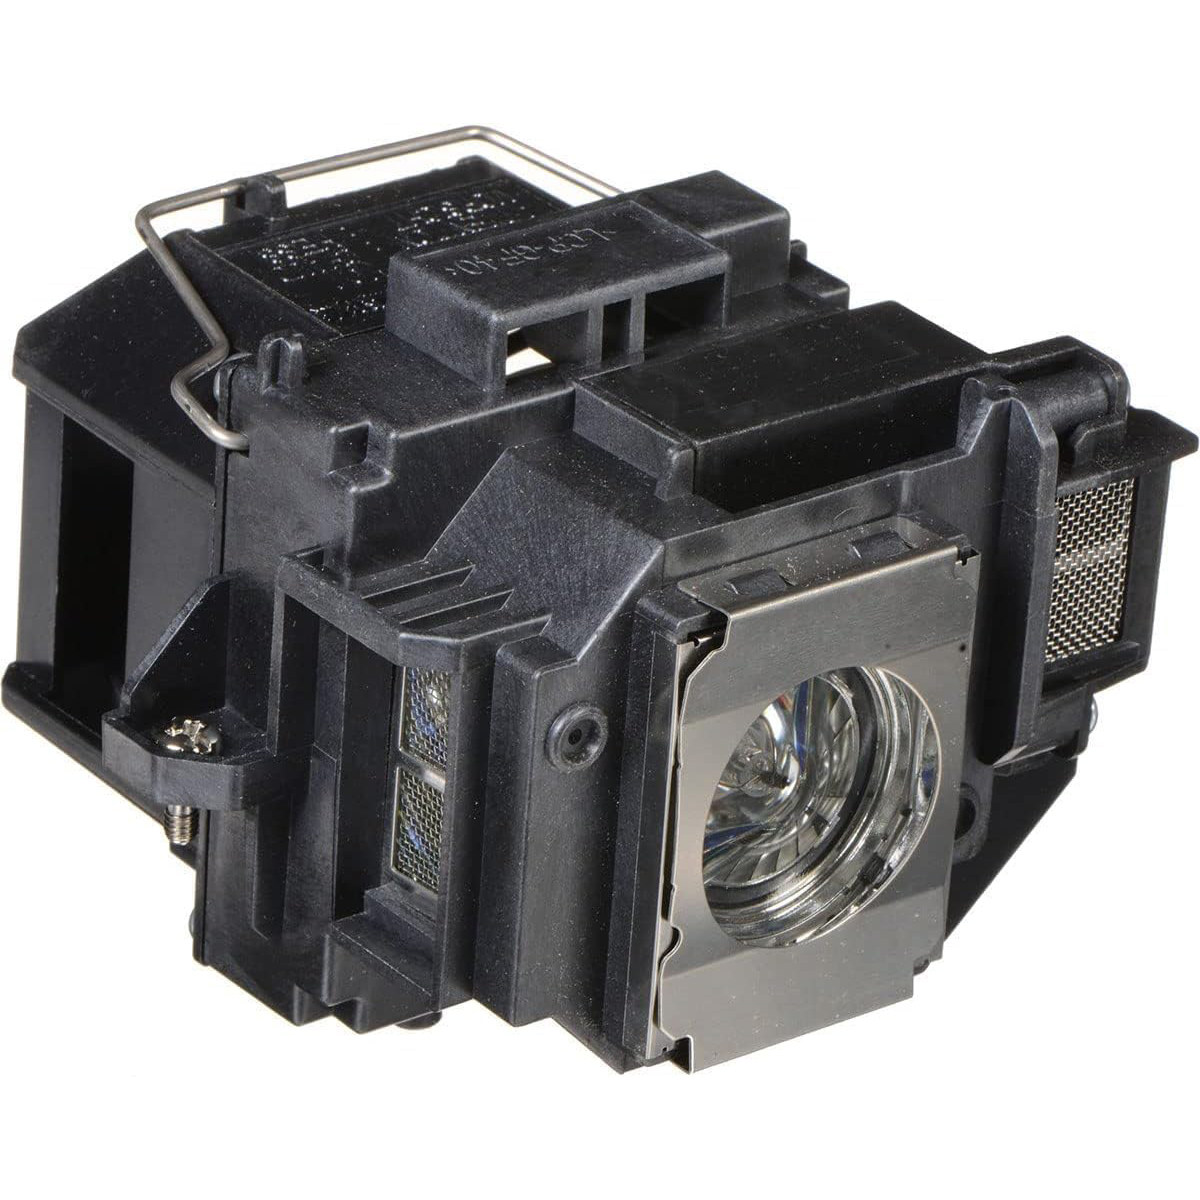 Replacement Projector lamp ELPLP66 For EPSON MovieMate 85HD